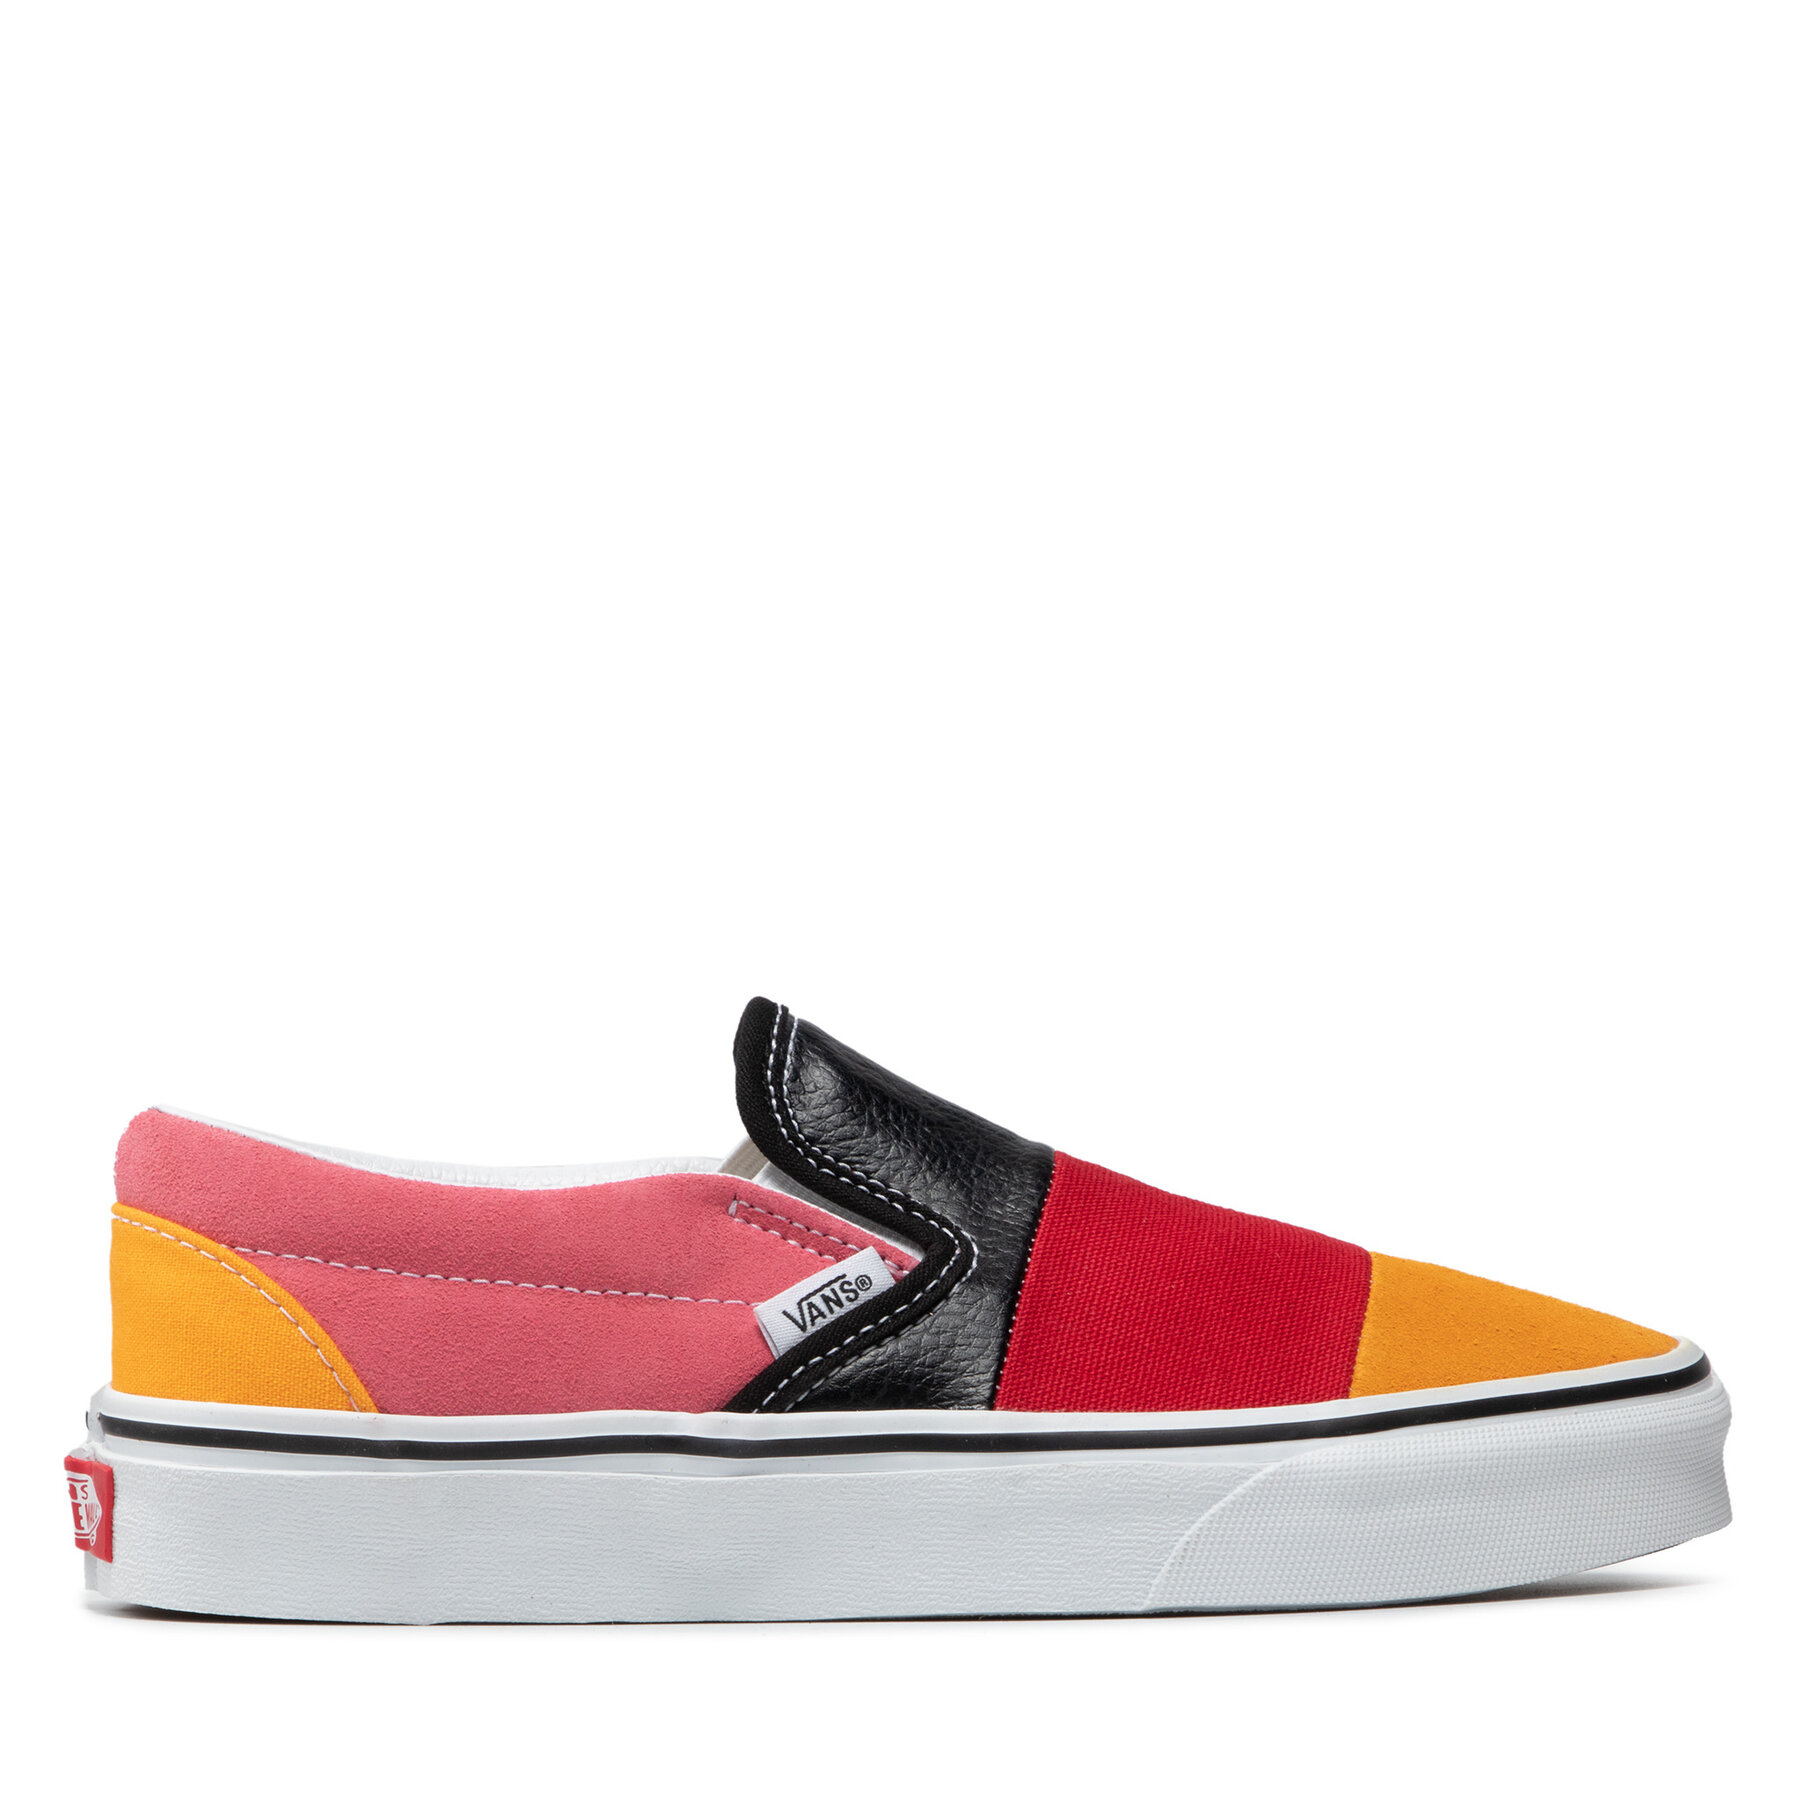 Sneakers aus Stoff Vans Classic Slip-On VN0A38F7VMF1 (Patchwork) Multi/Ture Wh von Vans